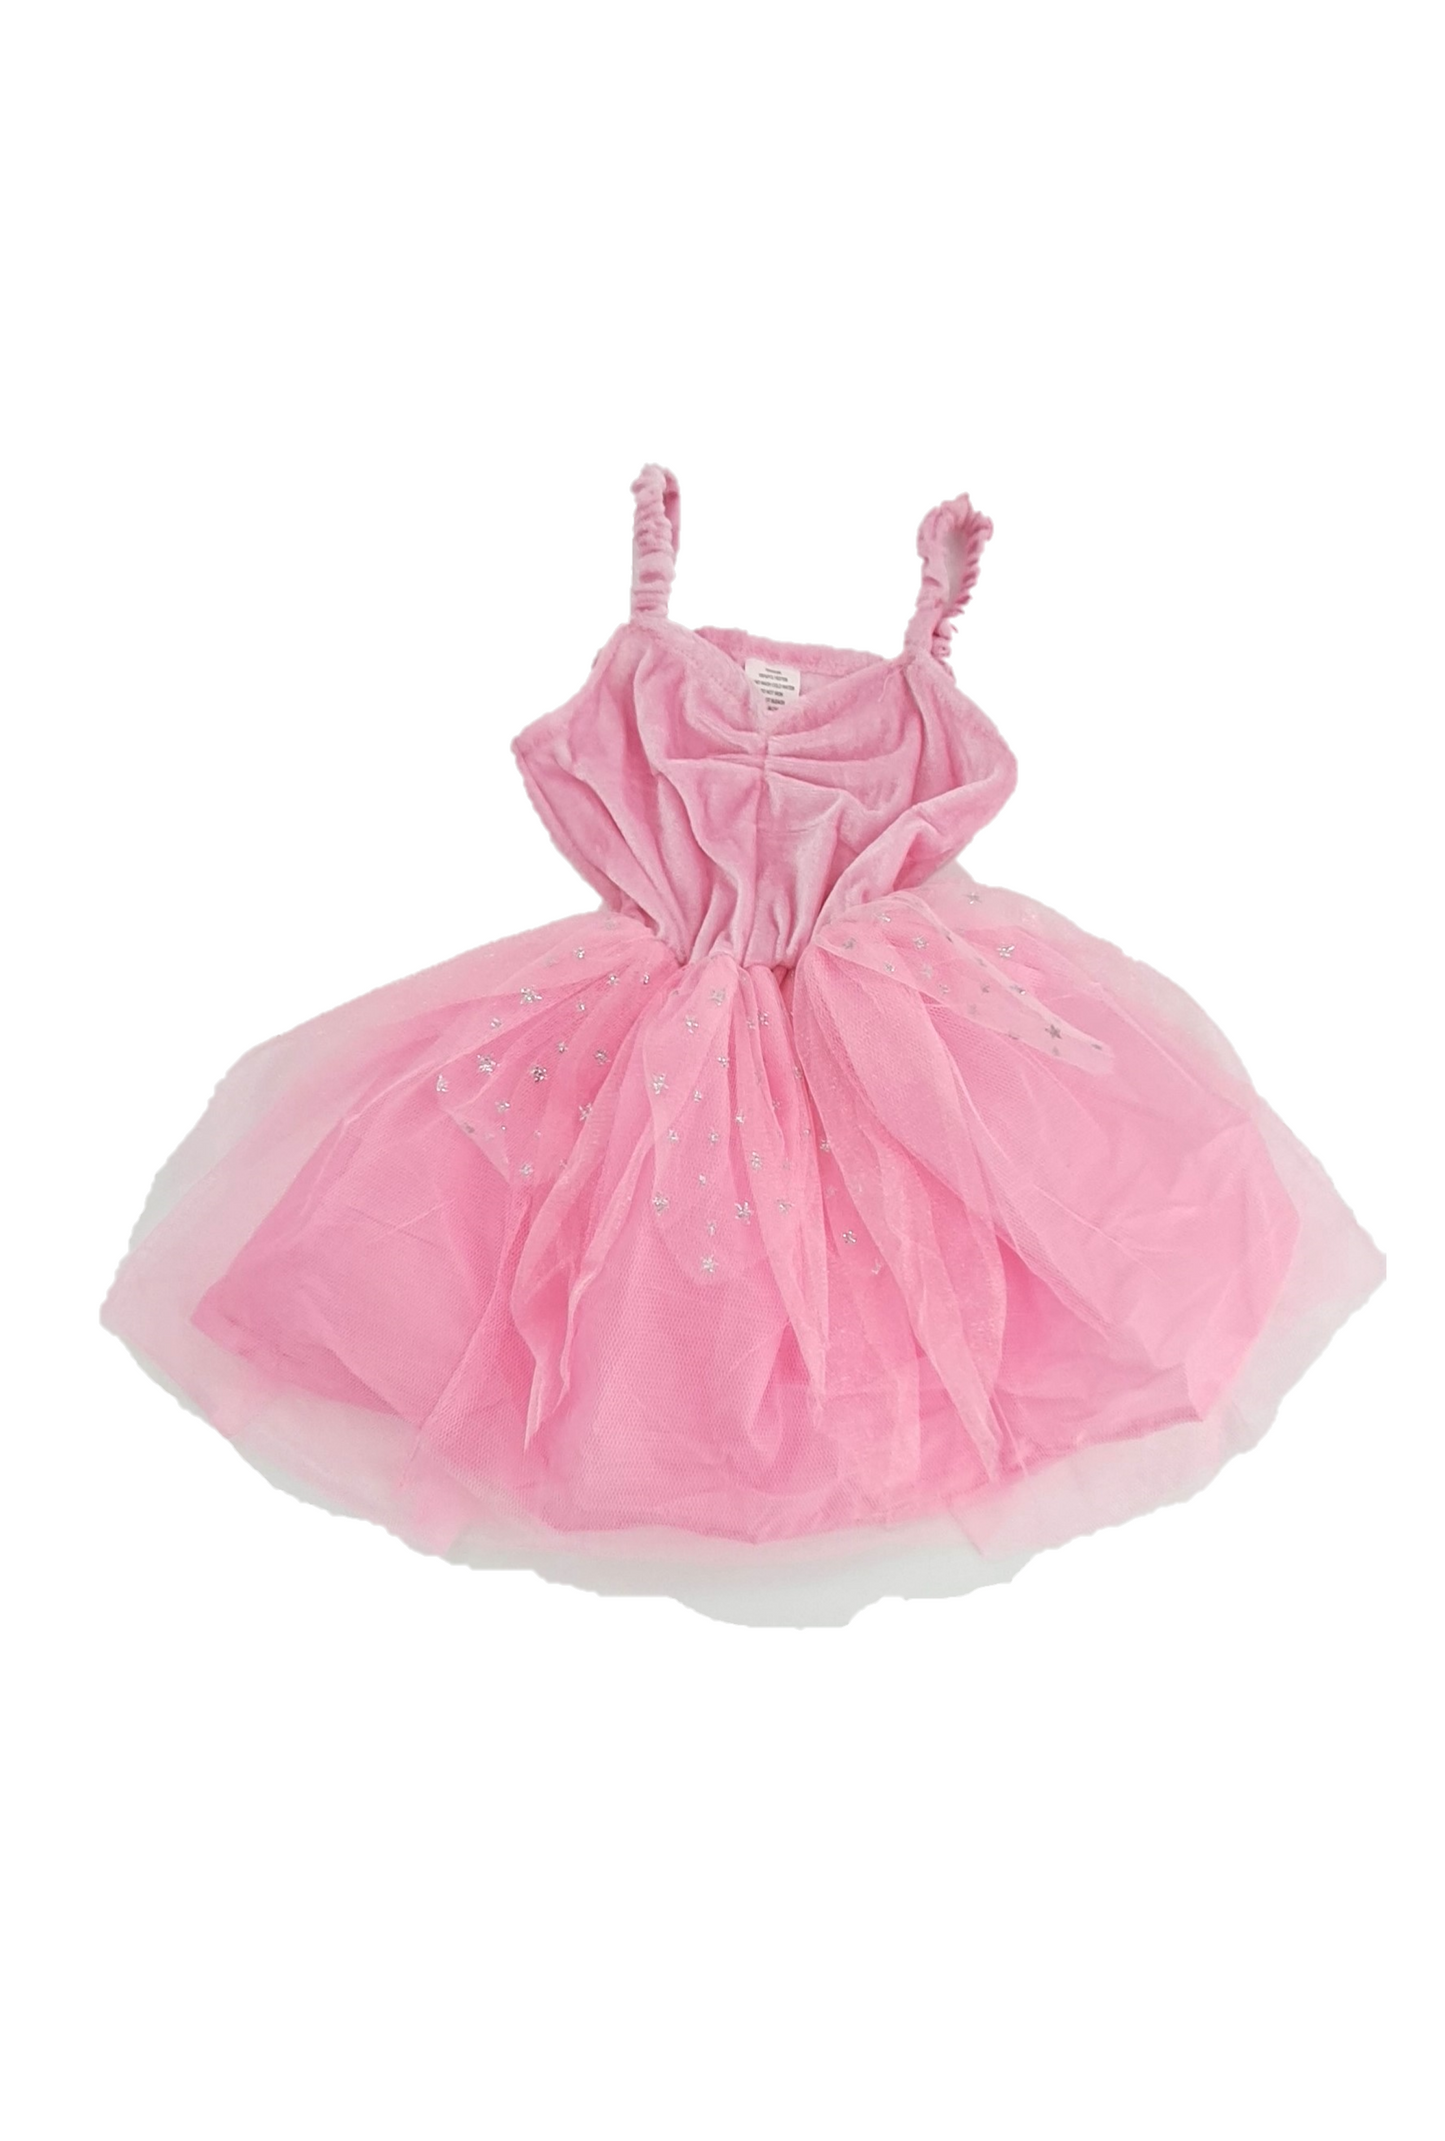 Girl’s Pink Toddler Fairy Fancy Dress Costume Age 2-3 Years